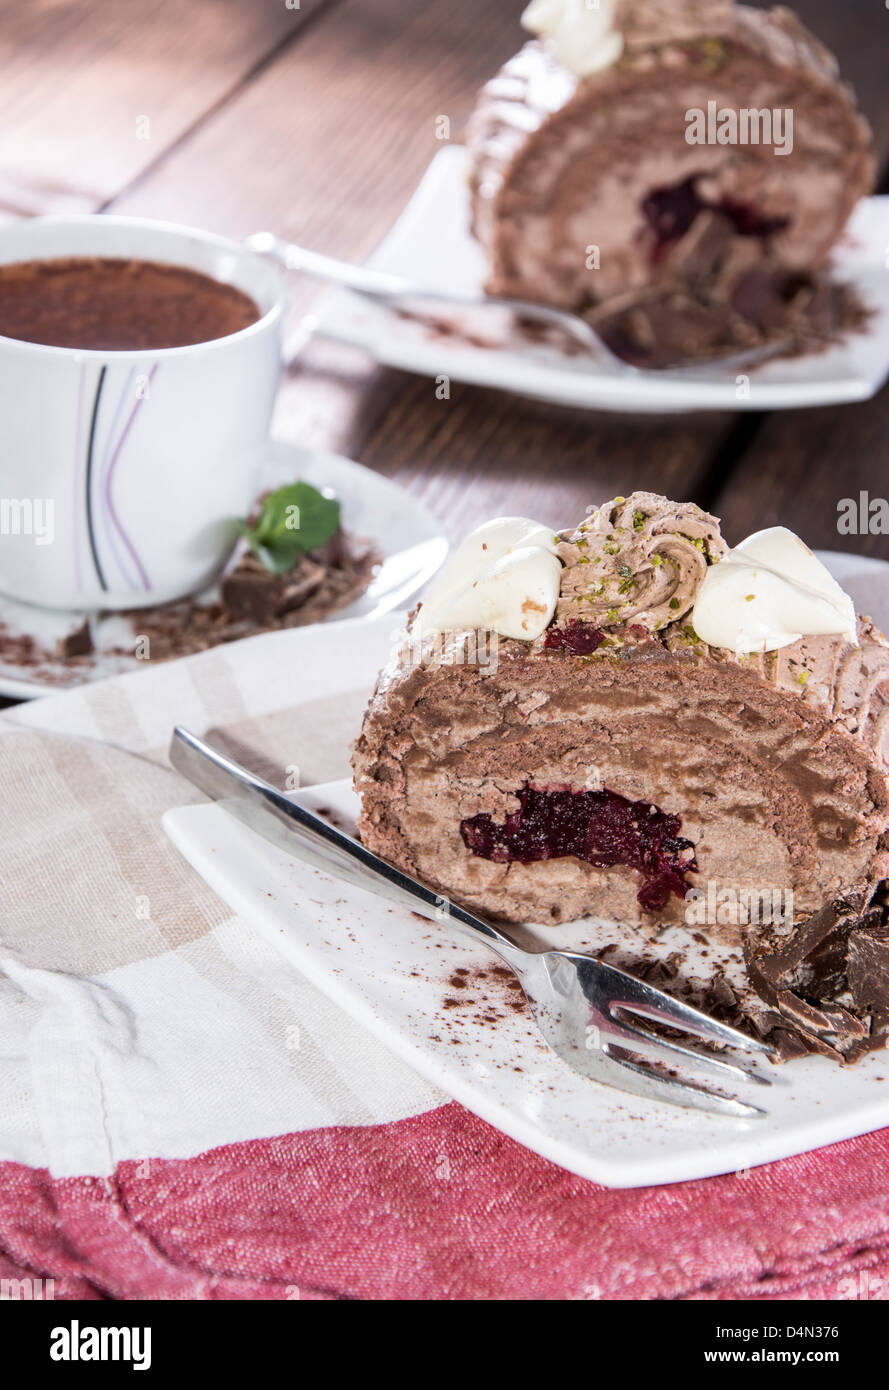 Portion of Chocolate Cake on wooden background Stock Photo